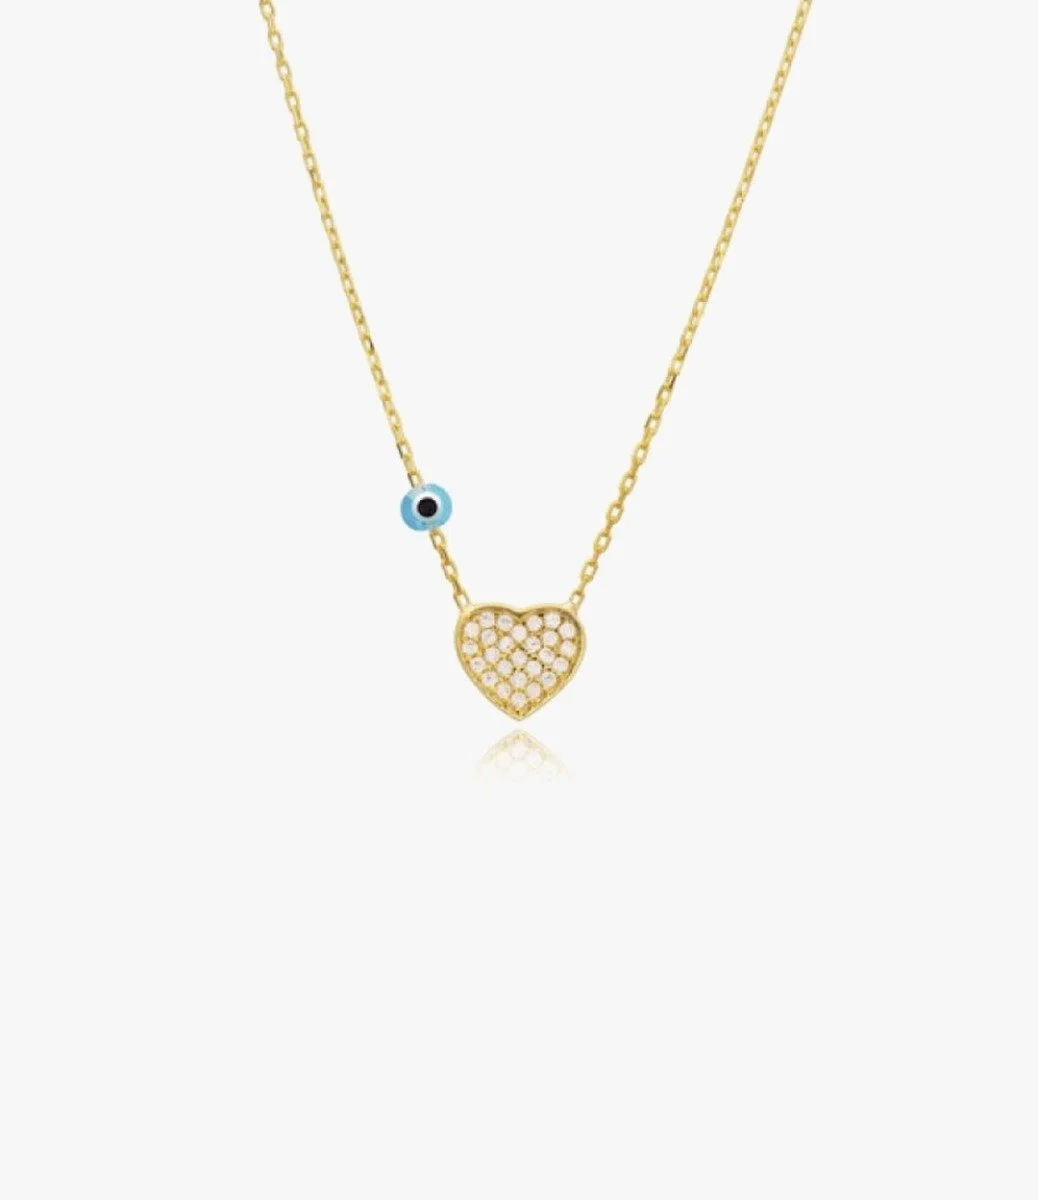 Necklace With a Heart Studded Pendant With Zircon Stones and a Blue Bead Knot by Nafees